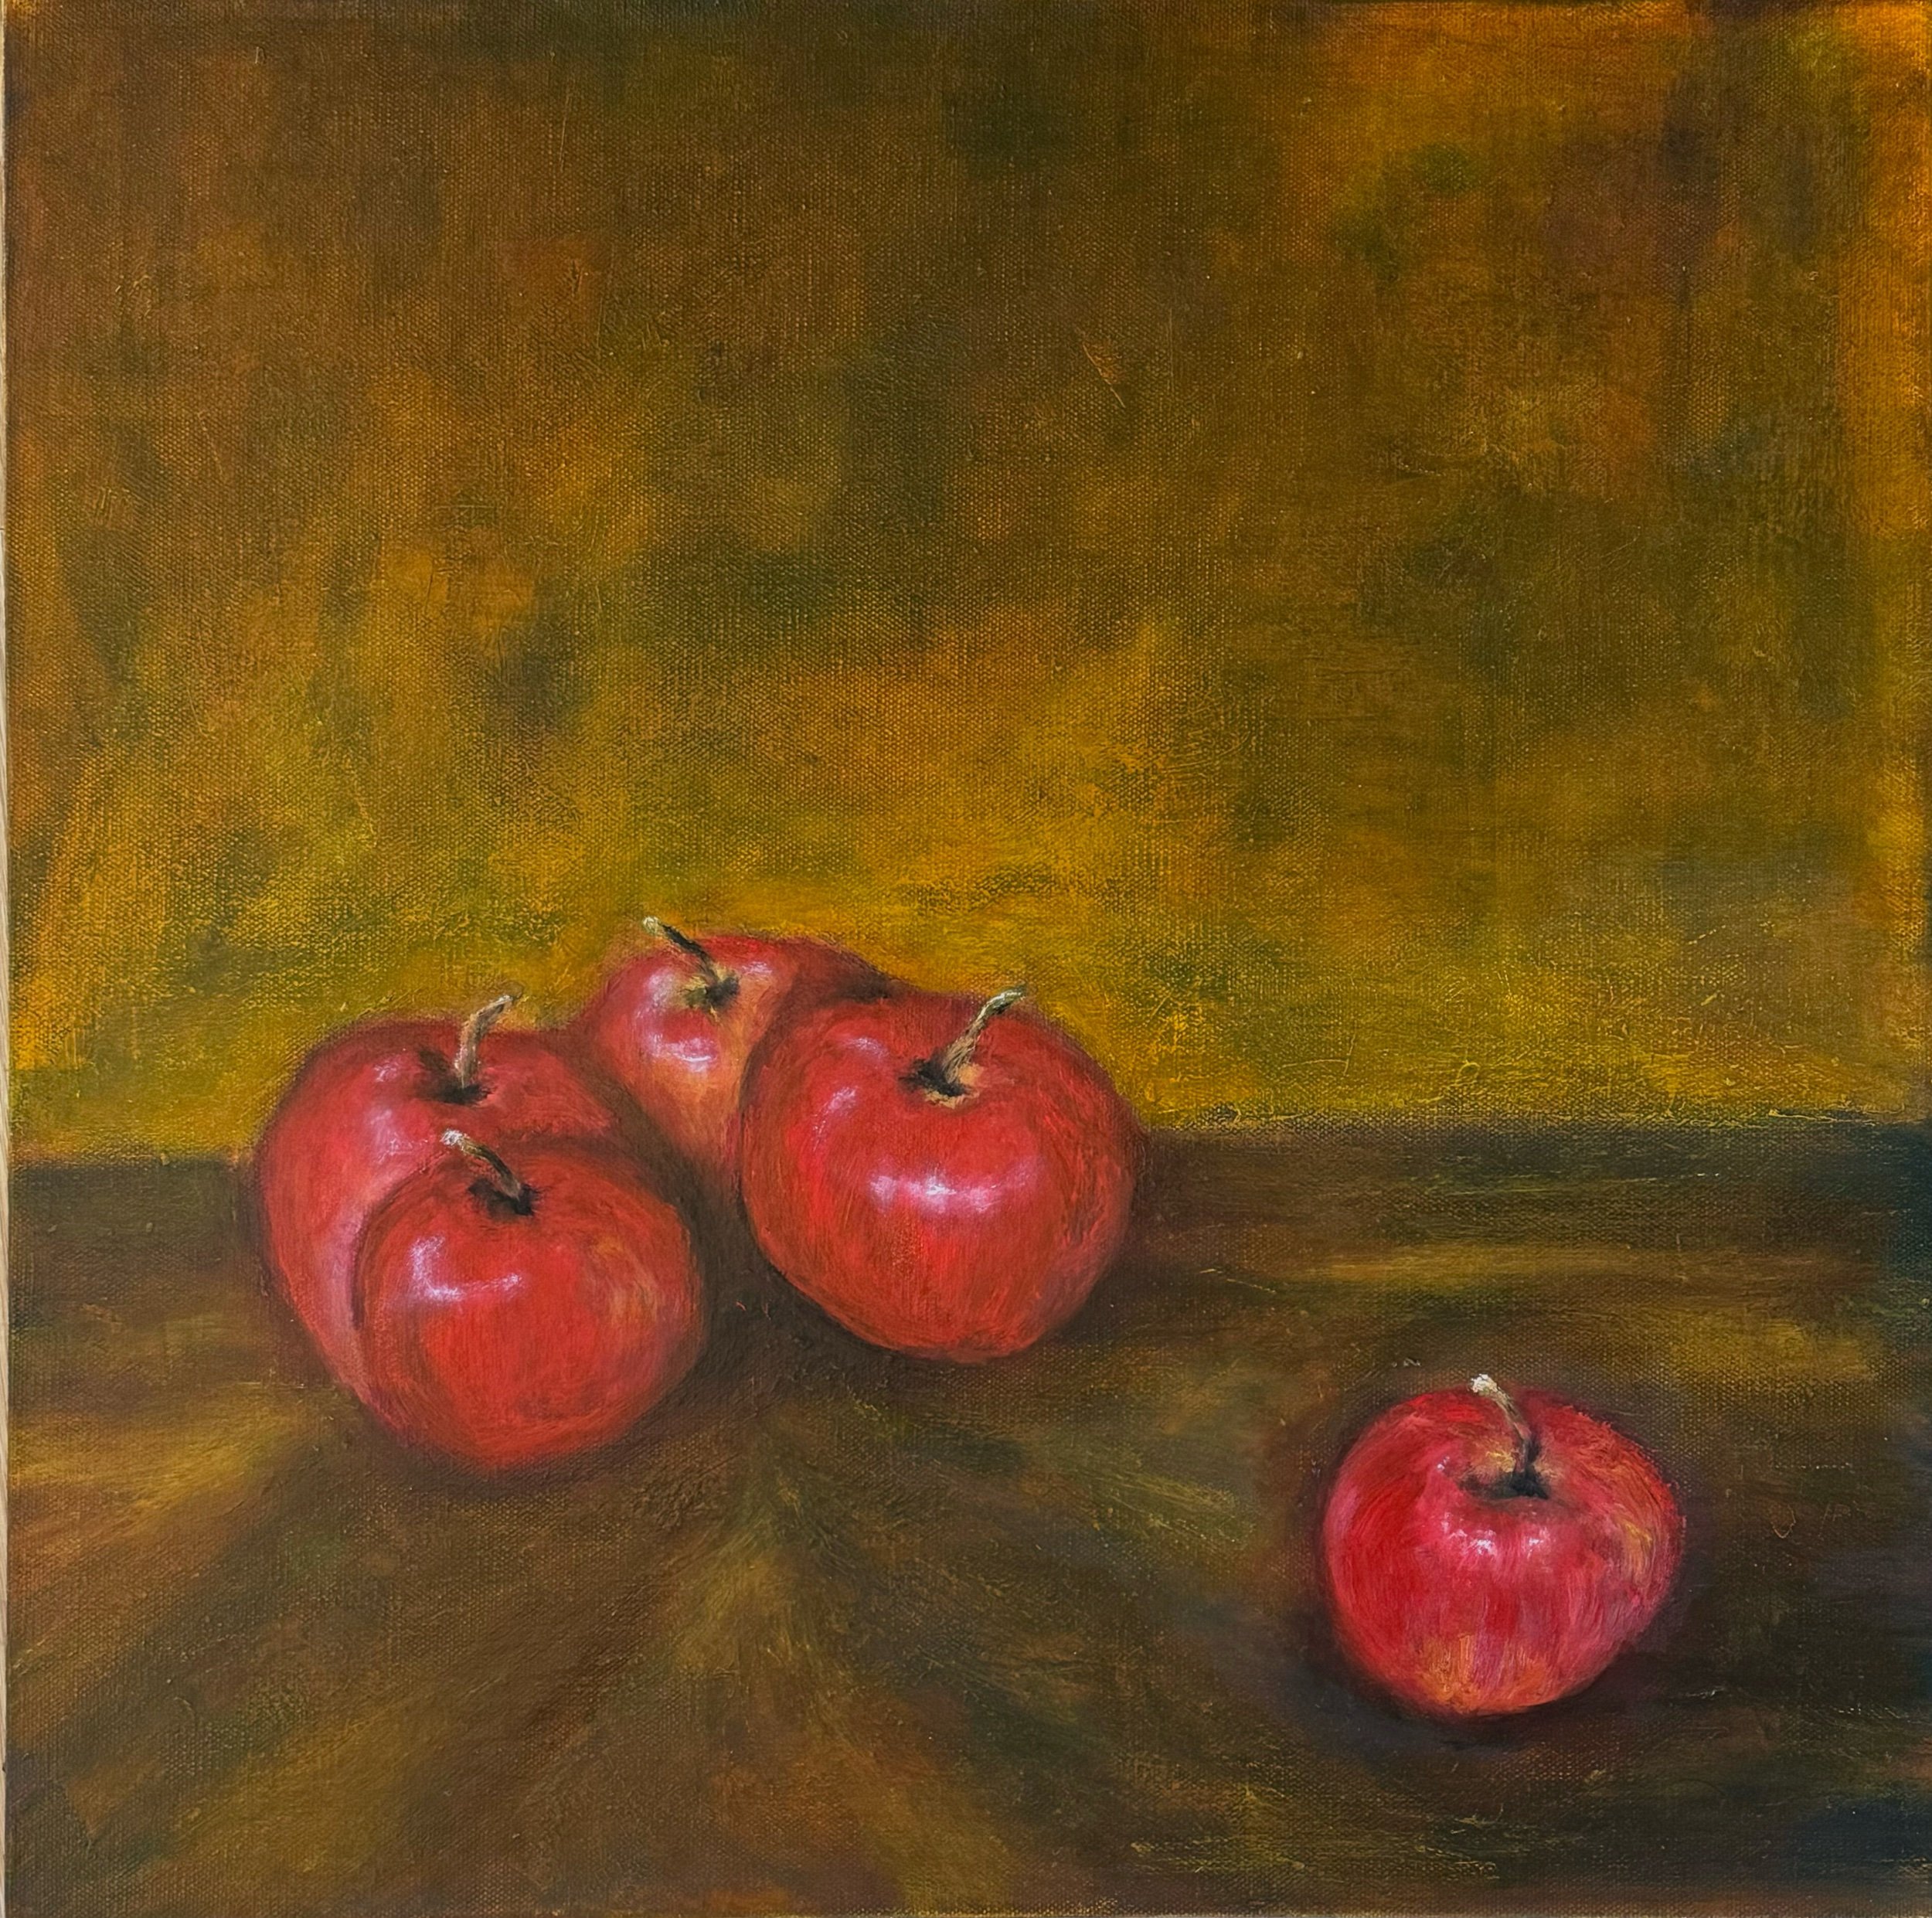 Five Apples 20”X20” $625 oil on gallery wrapped canvas